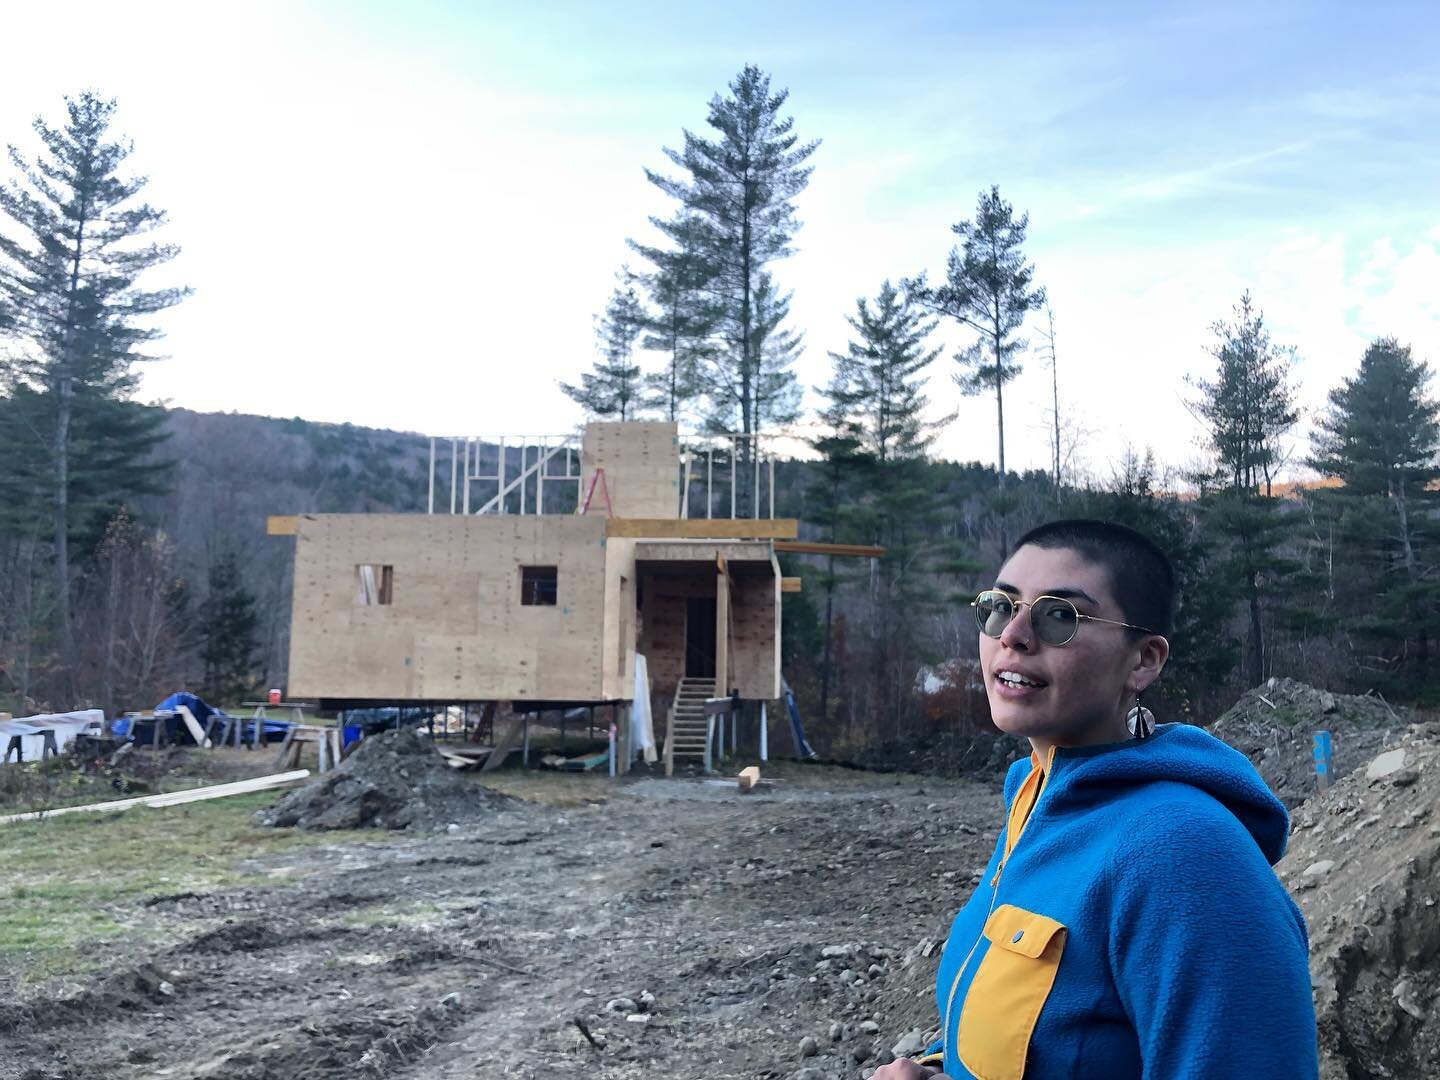 Bout fricken time I posted some kind of update. TL;DR, I am in Vermont learning how to design and build a sustainable house, powered by a community gofundme and a healthy dose of savings. I am following a hunch of an interesting solution to both affo